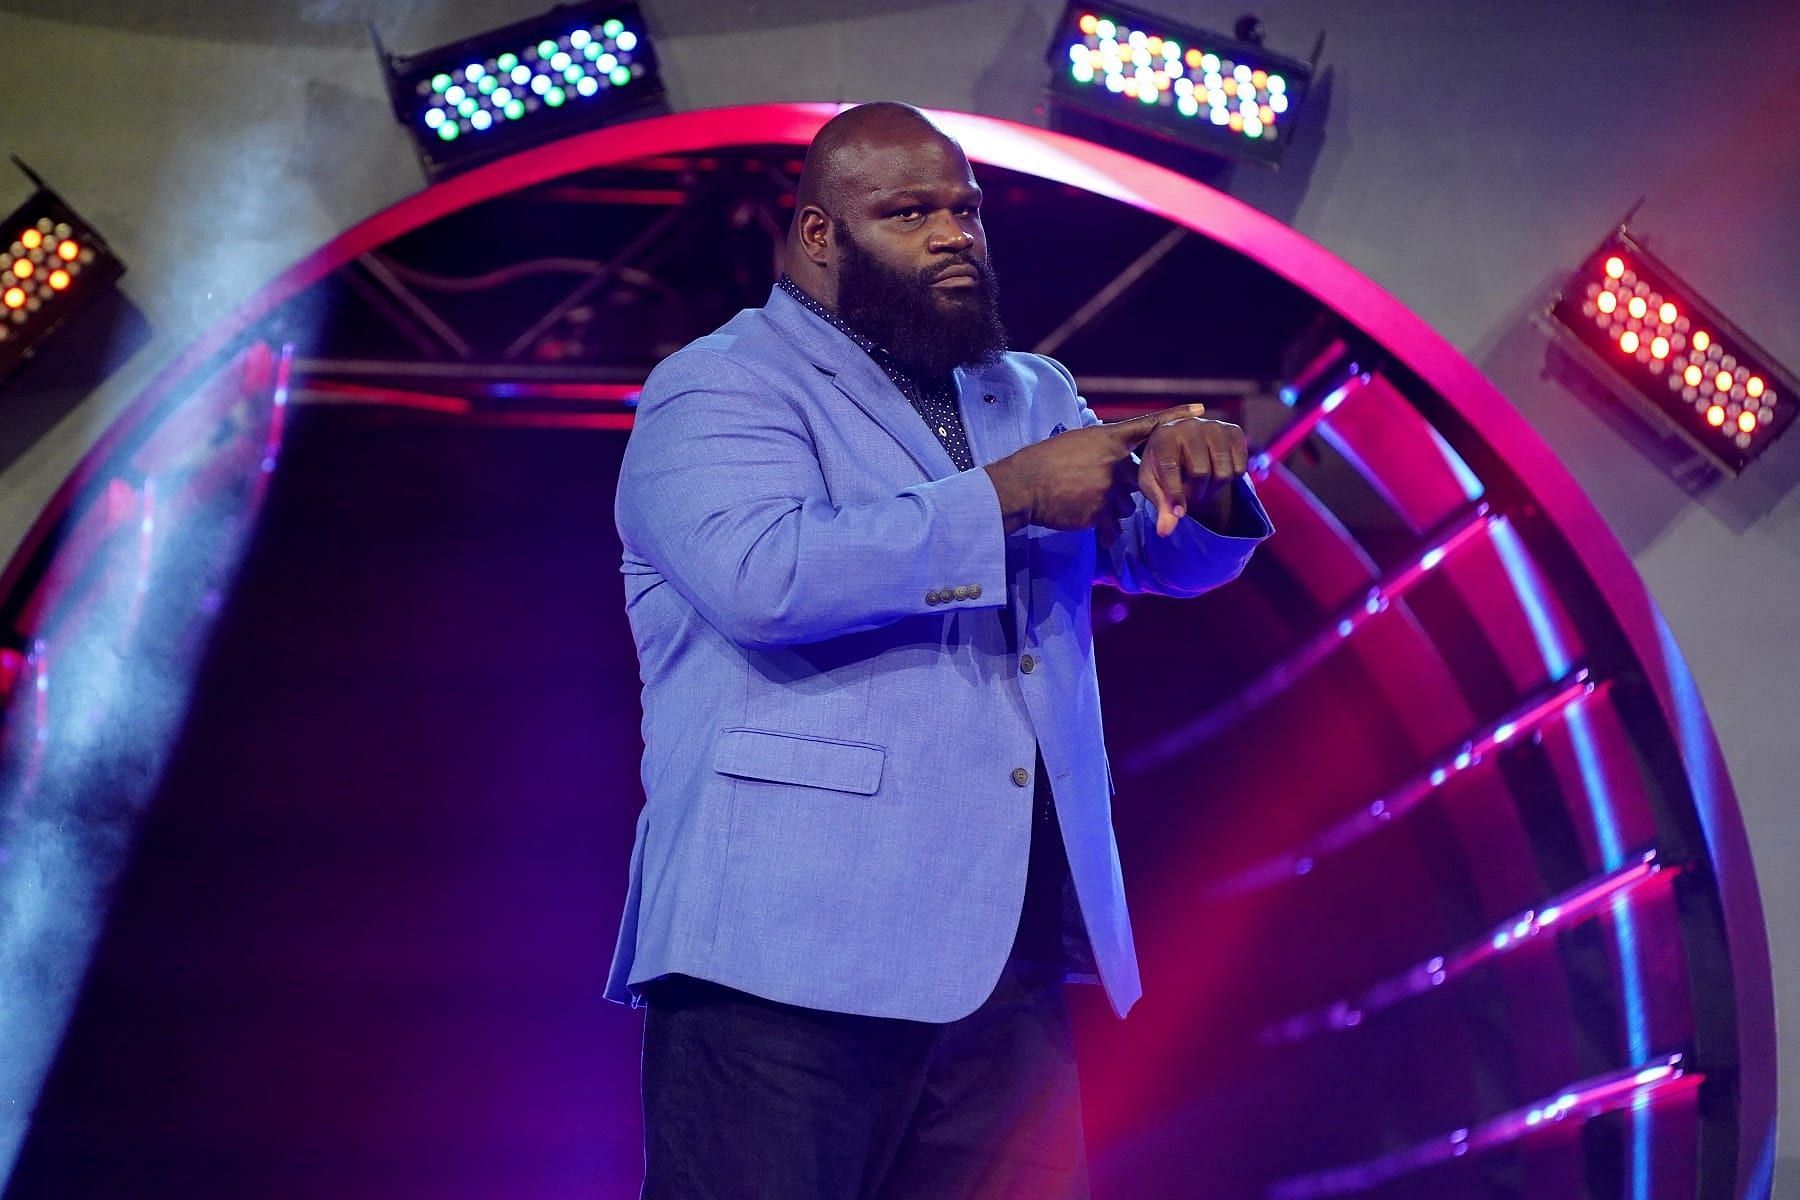 Will Mark Henry ever compete in an AEW ring?